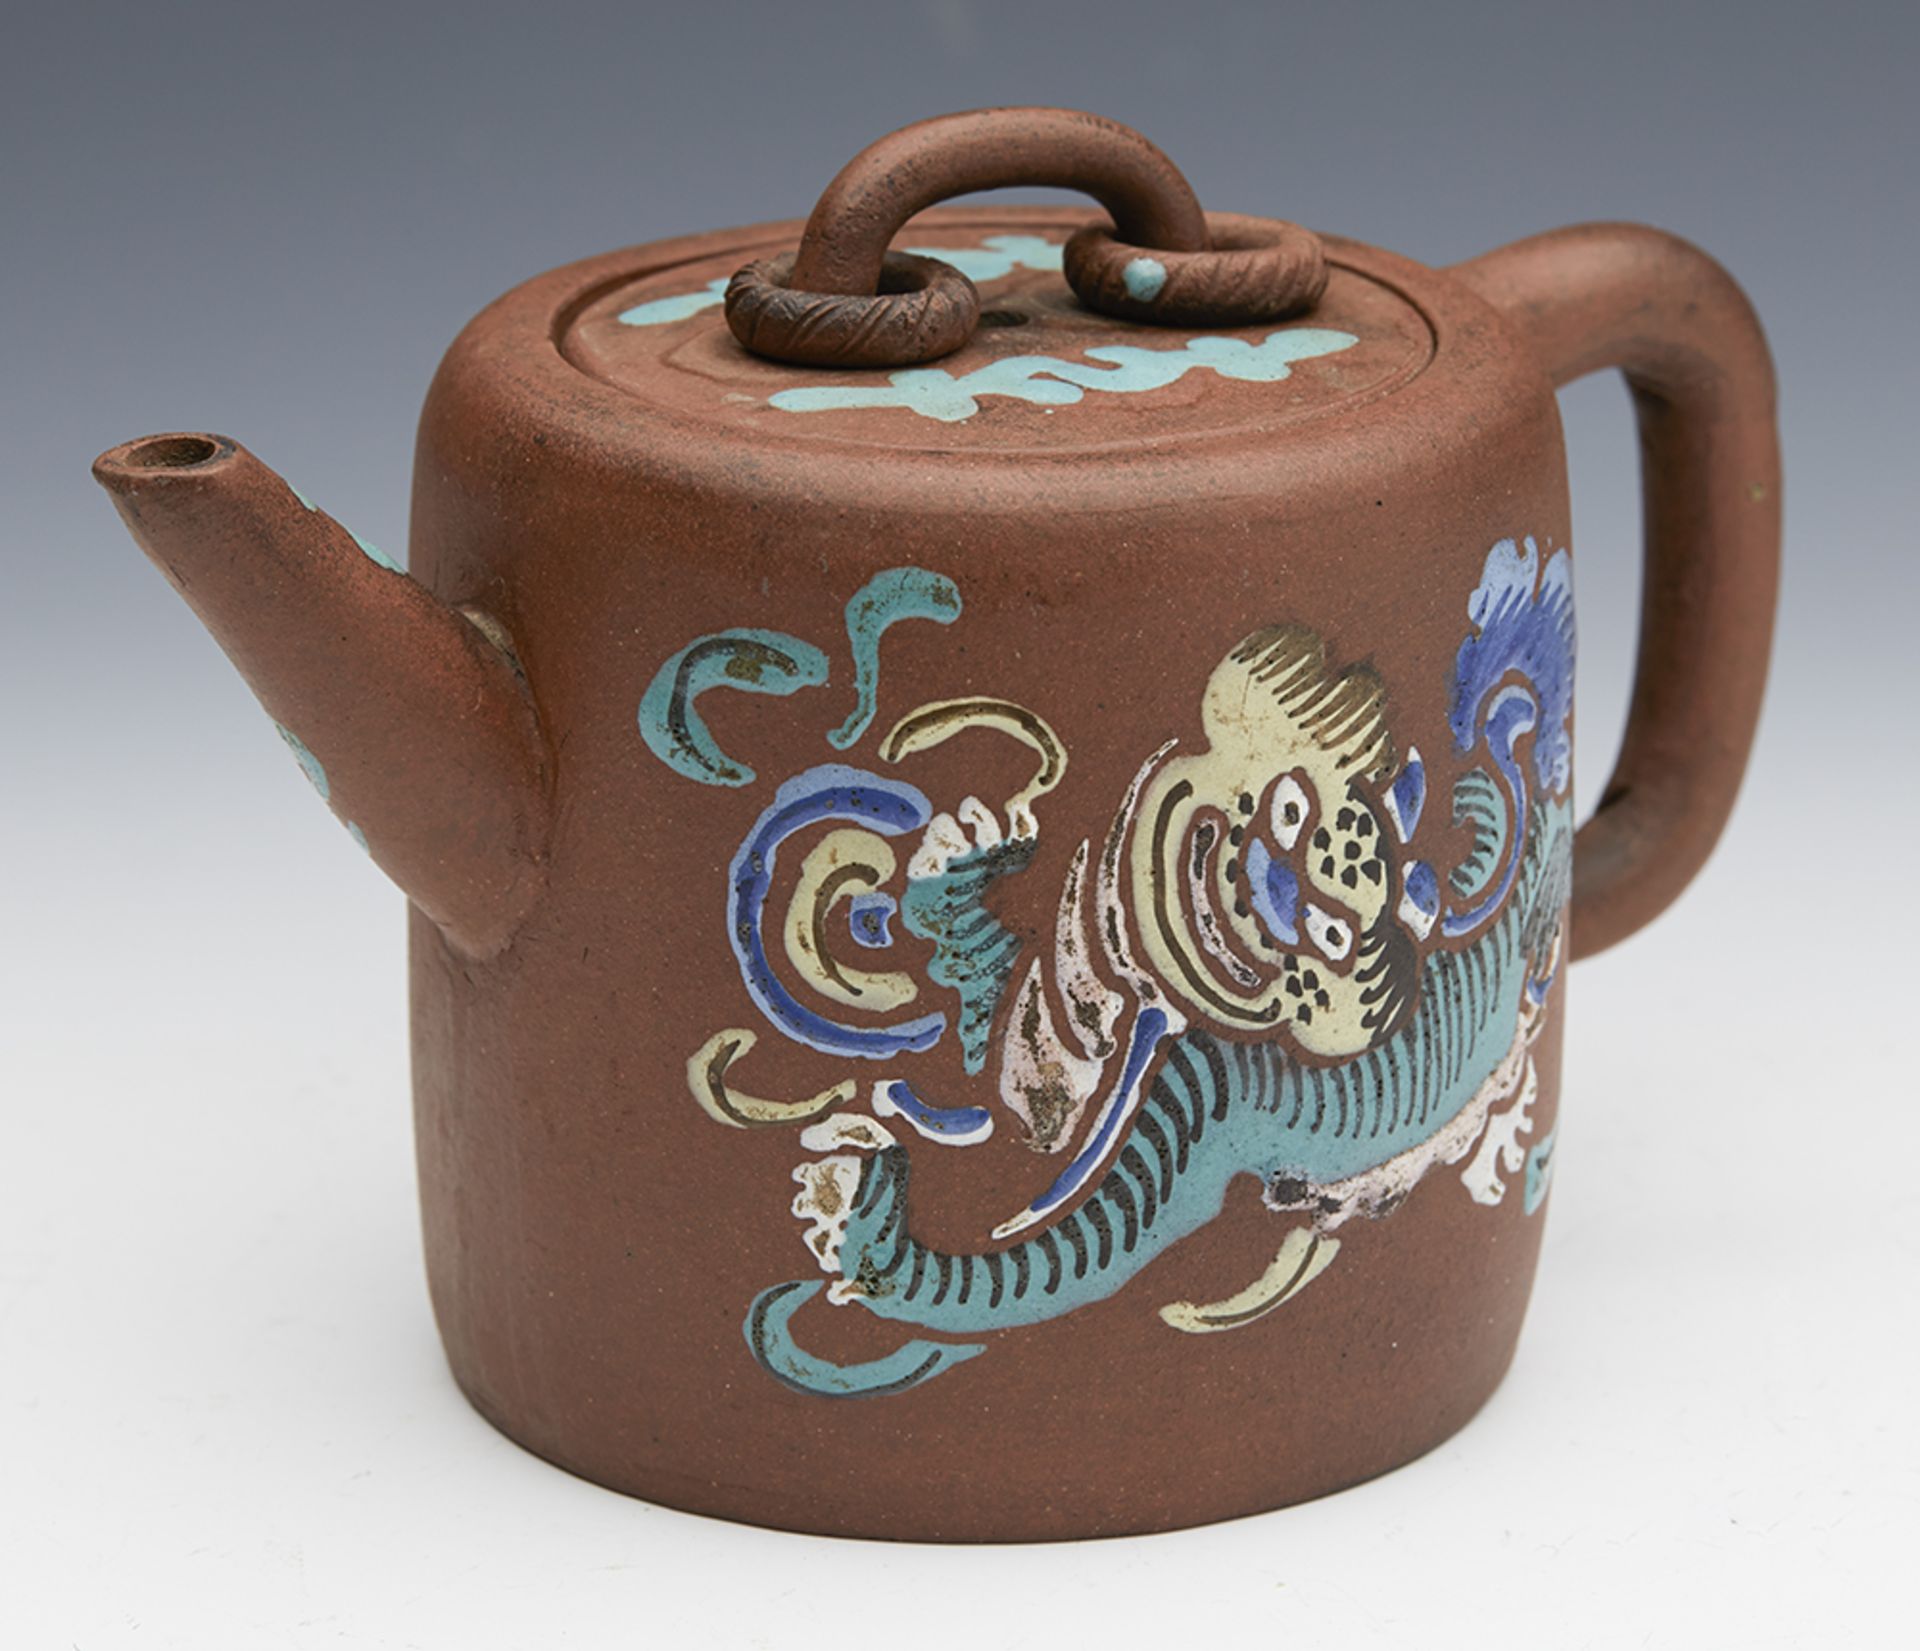 ANTIQUE CHINESE YIXING LIDDED TEAPOT 18/19TH C.   DIMENSIONS   Height 10cm, Width 15,75cm